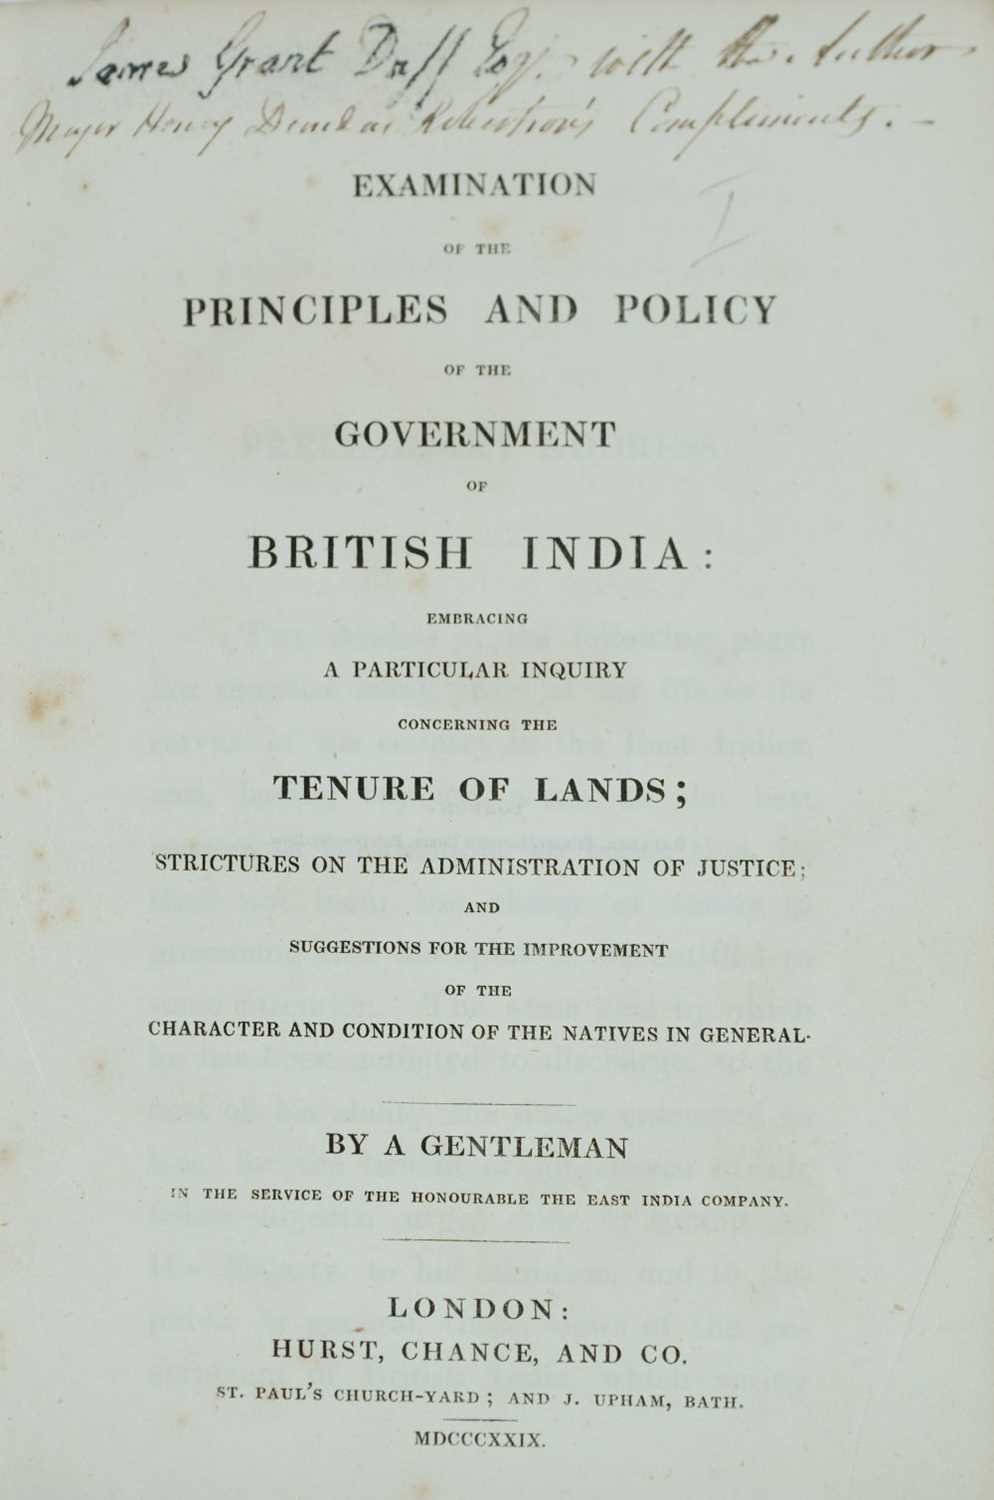 Lot 67 - Robertson (Henry). Examination of the Principles and Policy of the Government of British India, 1829